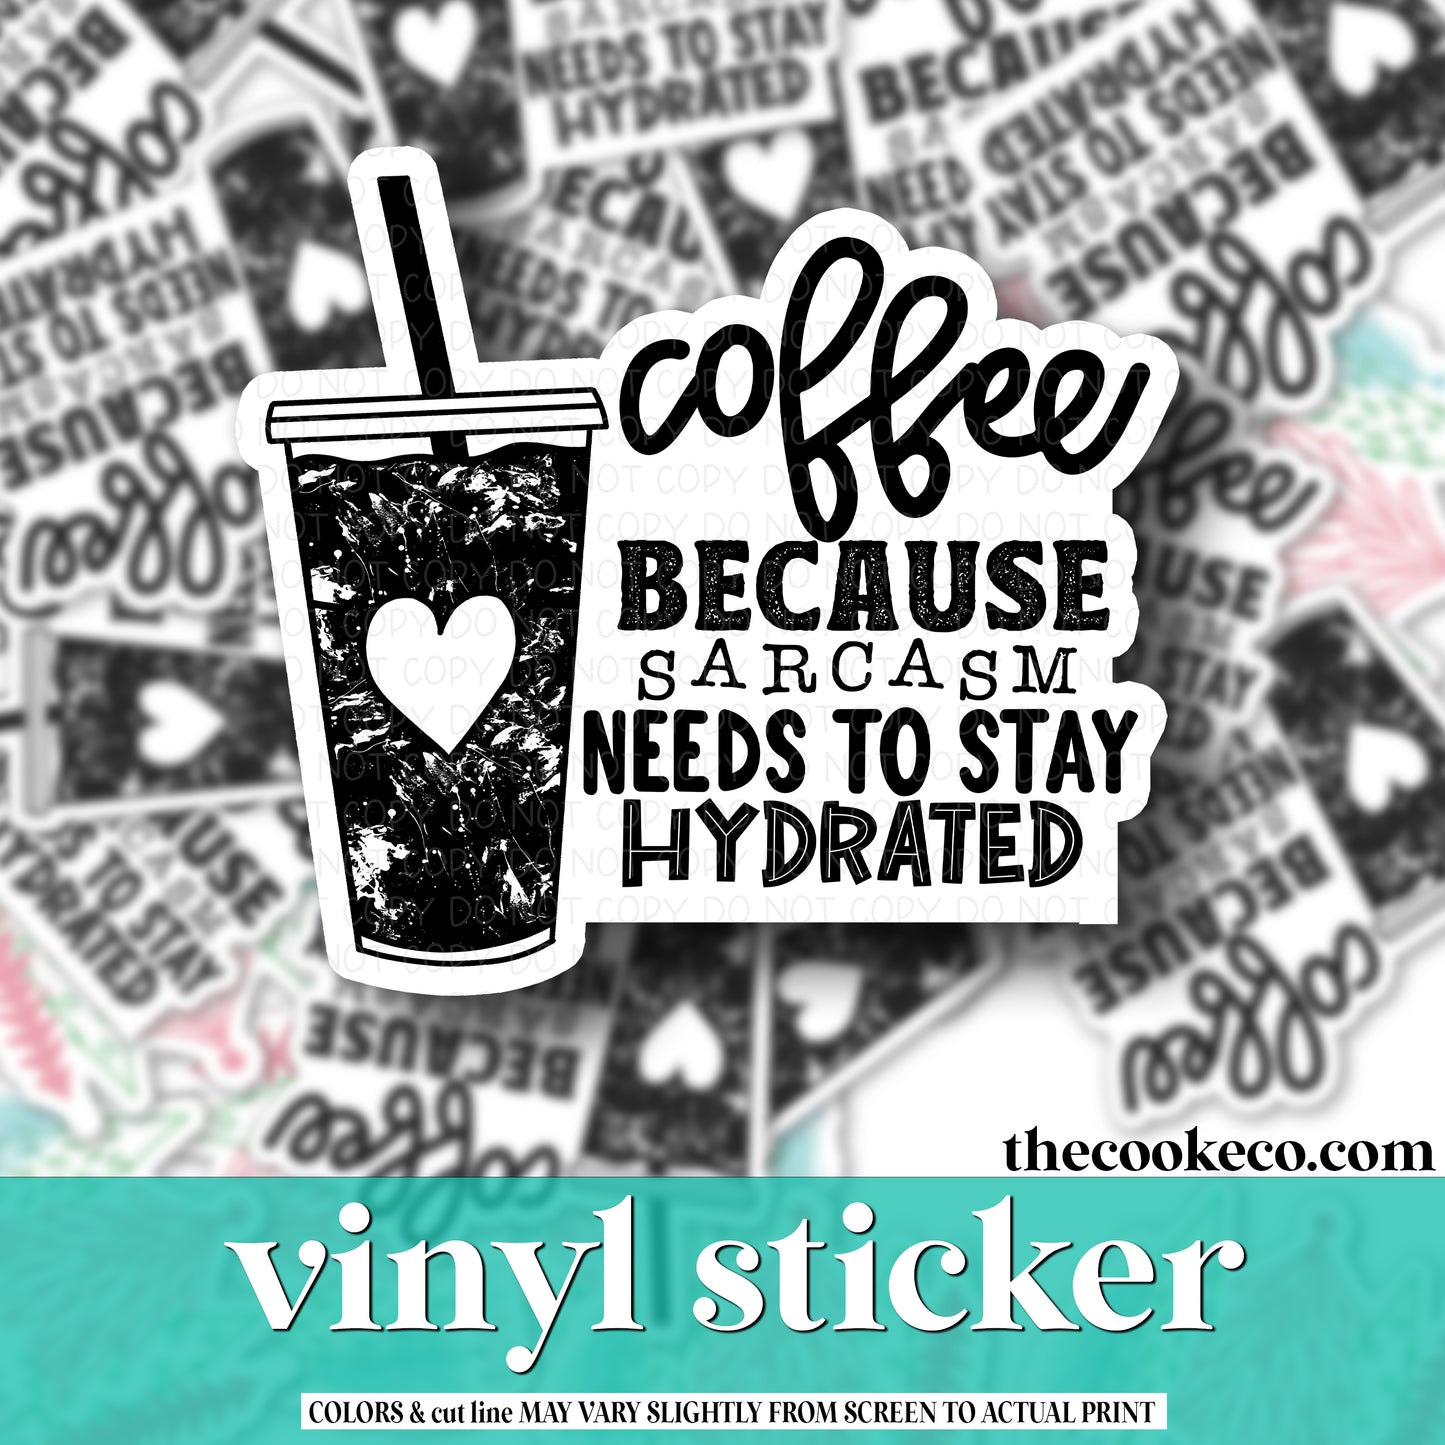 Vinyl Sticker | #V0985 - COFFEE BECAUSE SARCASM NEEDS TO STAY HYDRATED